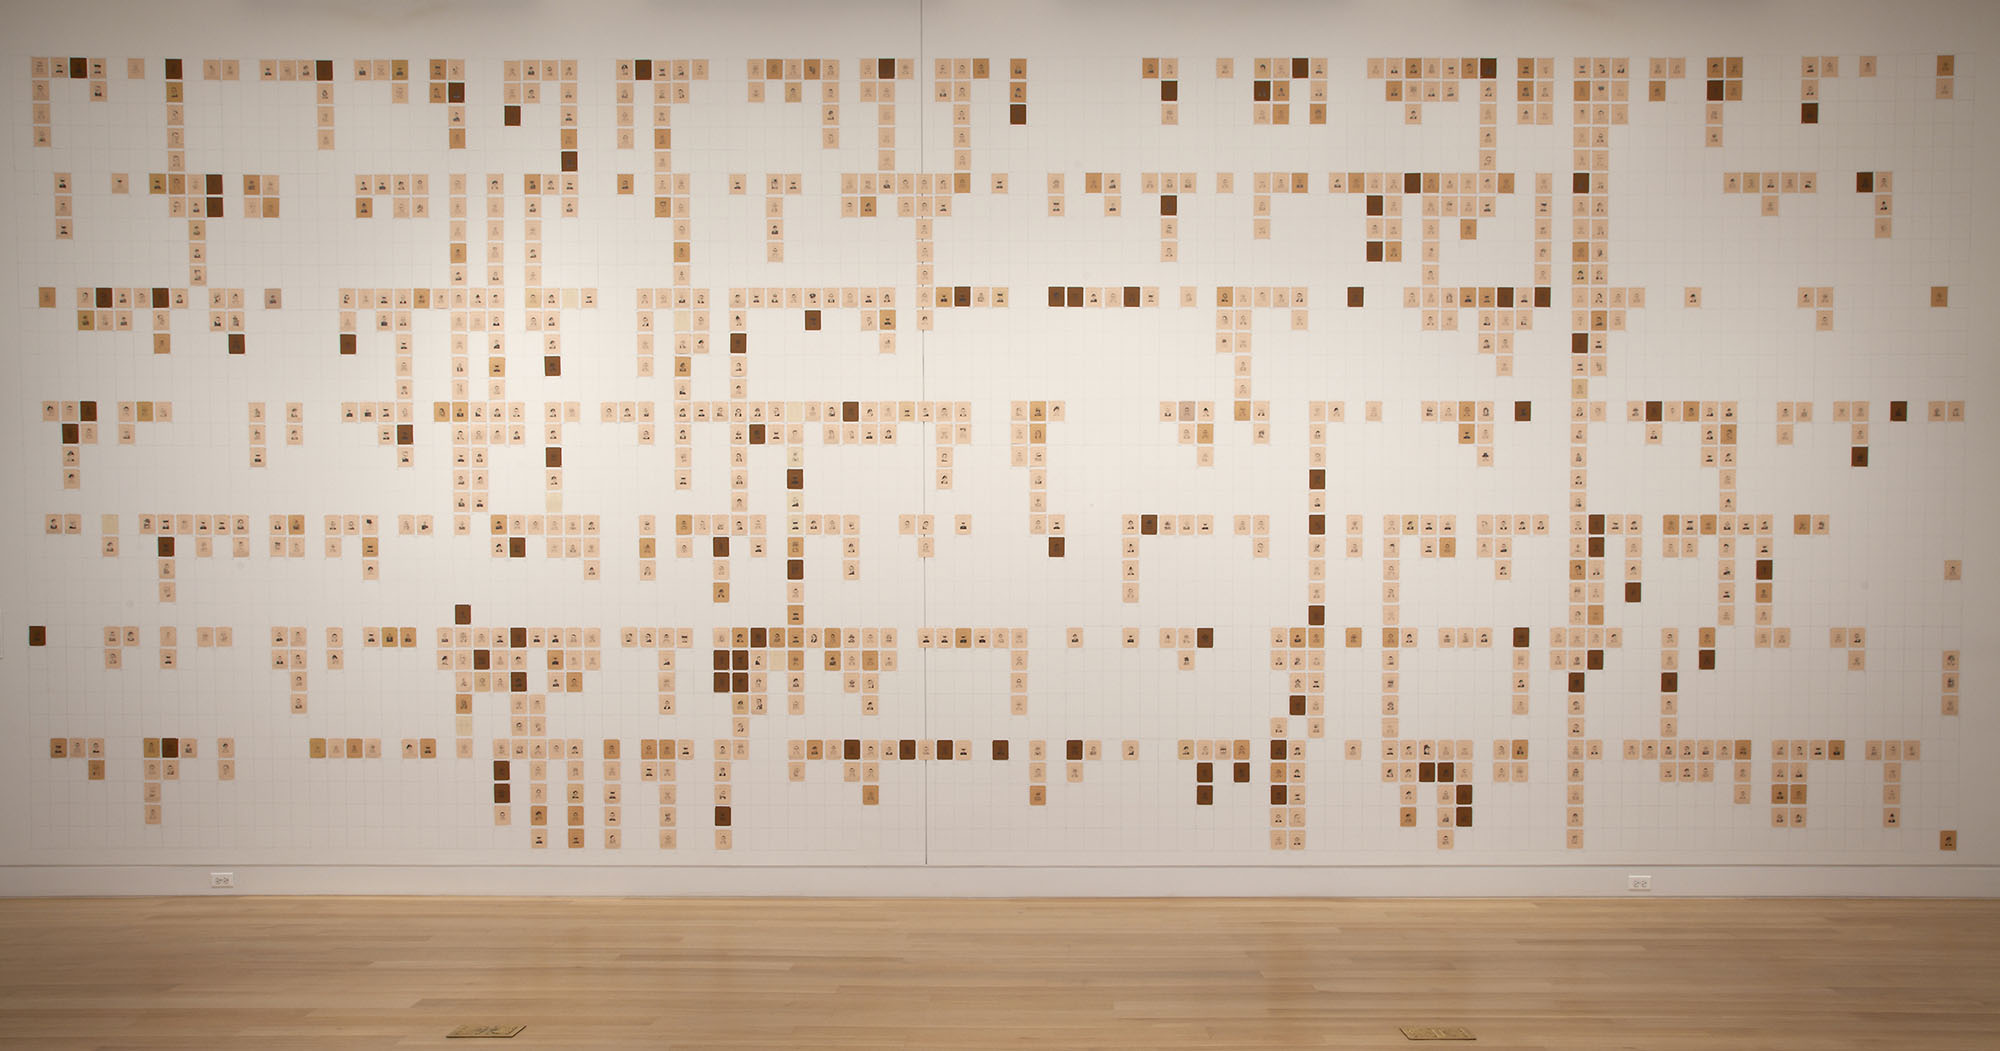 Emily Prince, American servicemen and women who have died in Iraq and Afghanistan (but Not Including the Wounded, nor the Iraqis nor the Afghans), Executed January 2004 – October 2010. 424 Individual Drawings, Hand drawn pencil on color coded vellum. Installation view at DePaul Art Museum, 2012. Courtesy of the artist and Kent Fine Arts